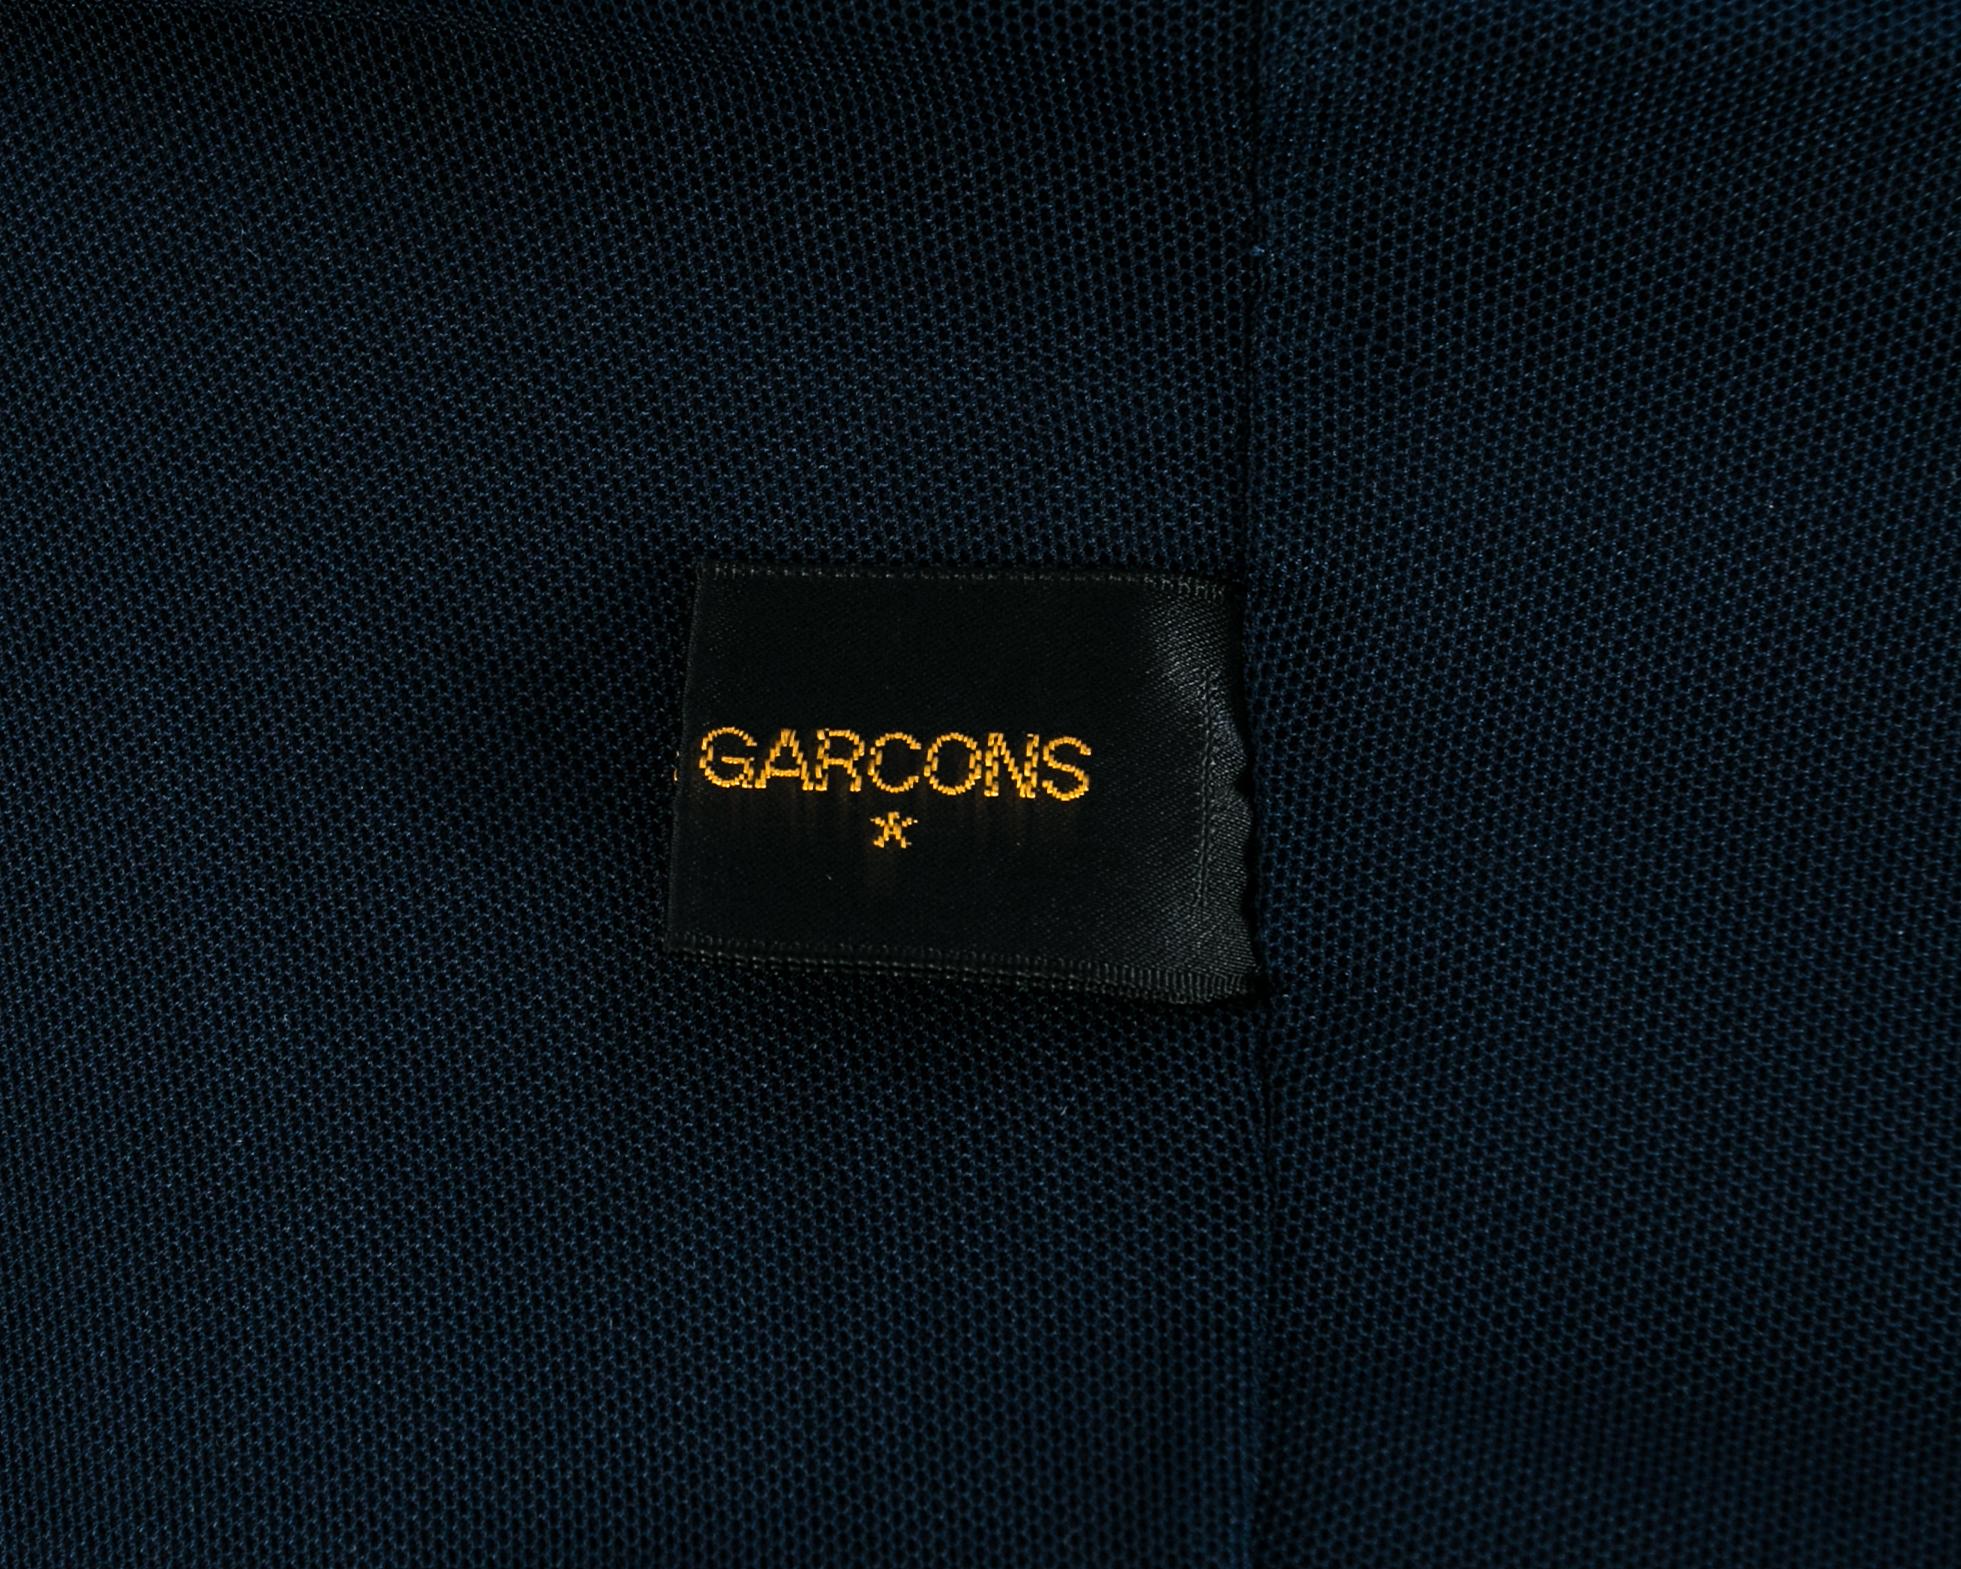 Comme des Garcons 'Lumps and Bumps' navy wool padded jacket, ss 1997 5